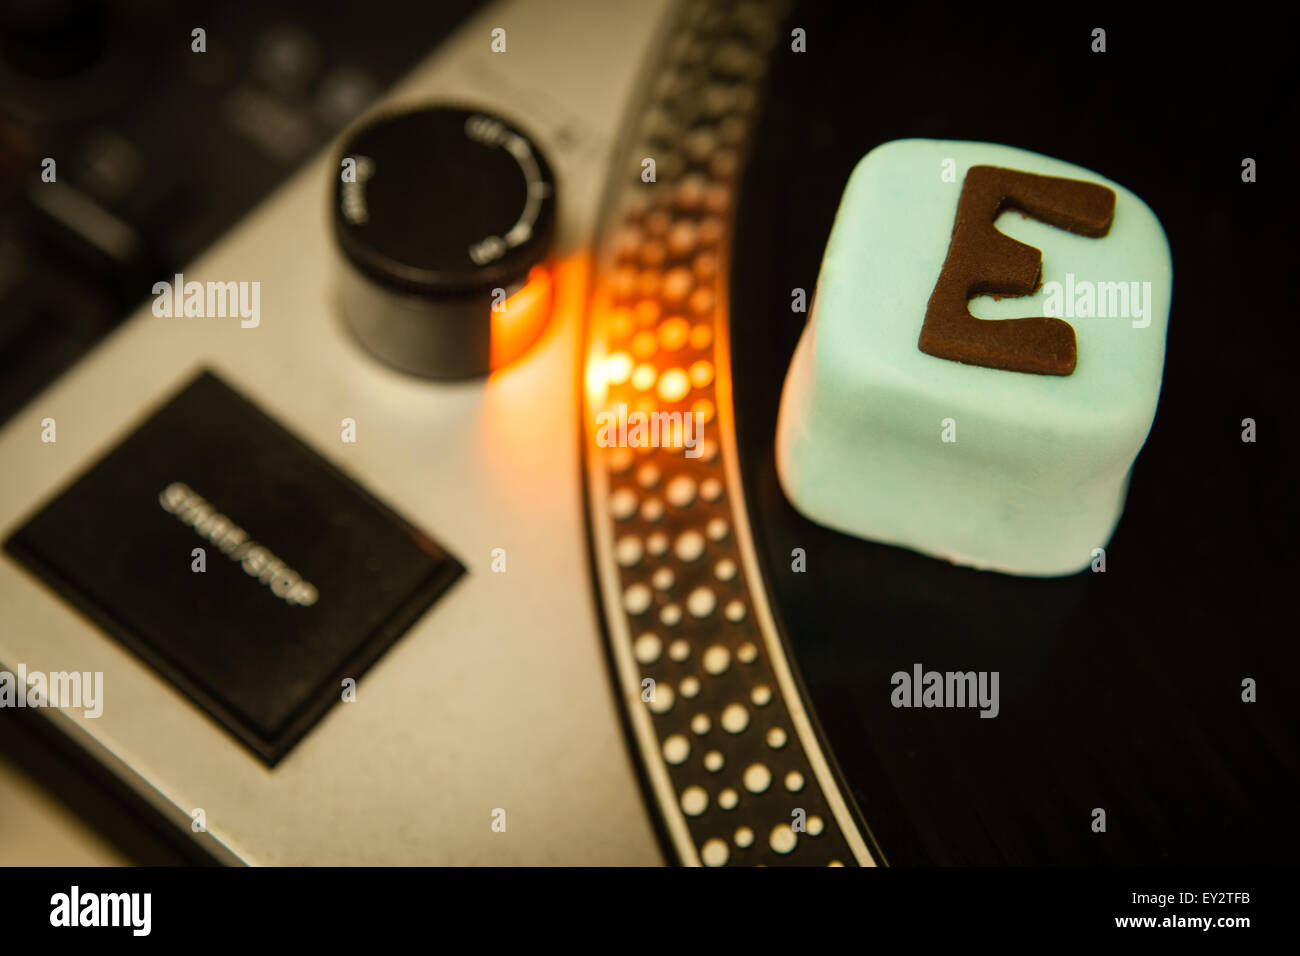 A cake with E for ecstasy written on it sitting on a Dj's record deck Stock Photo